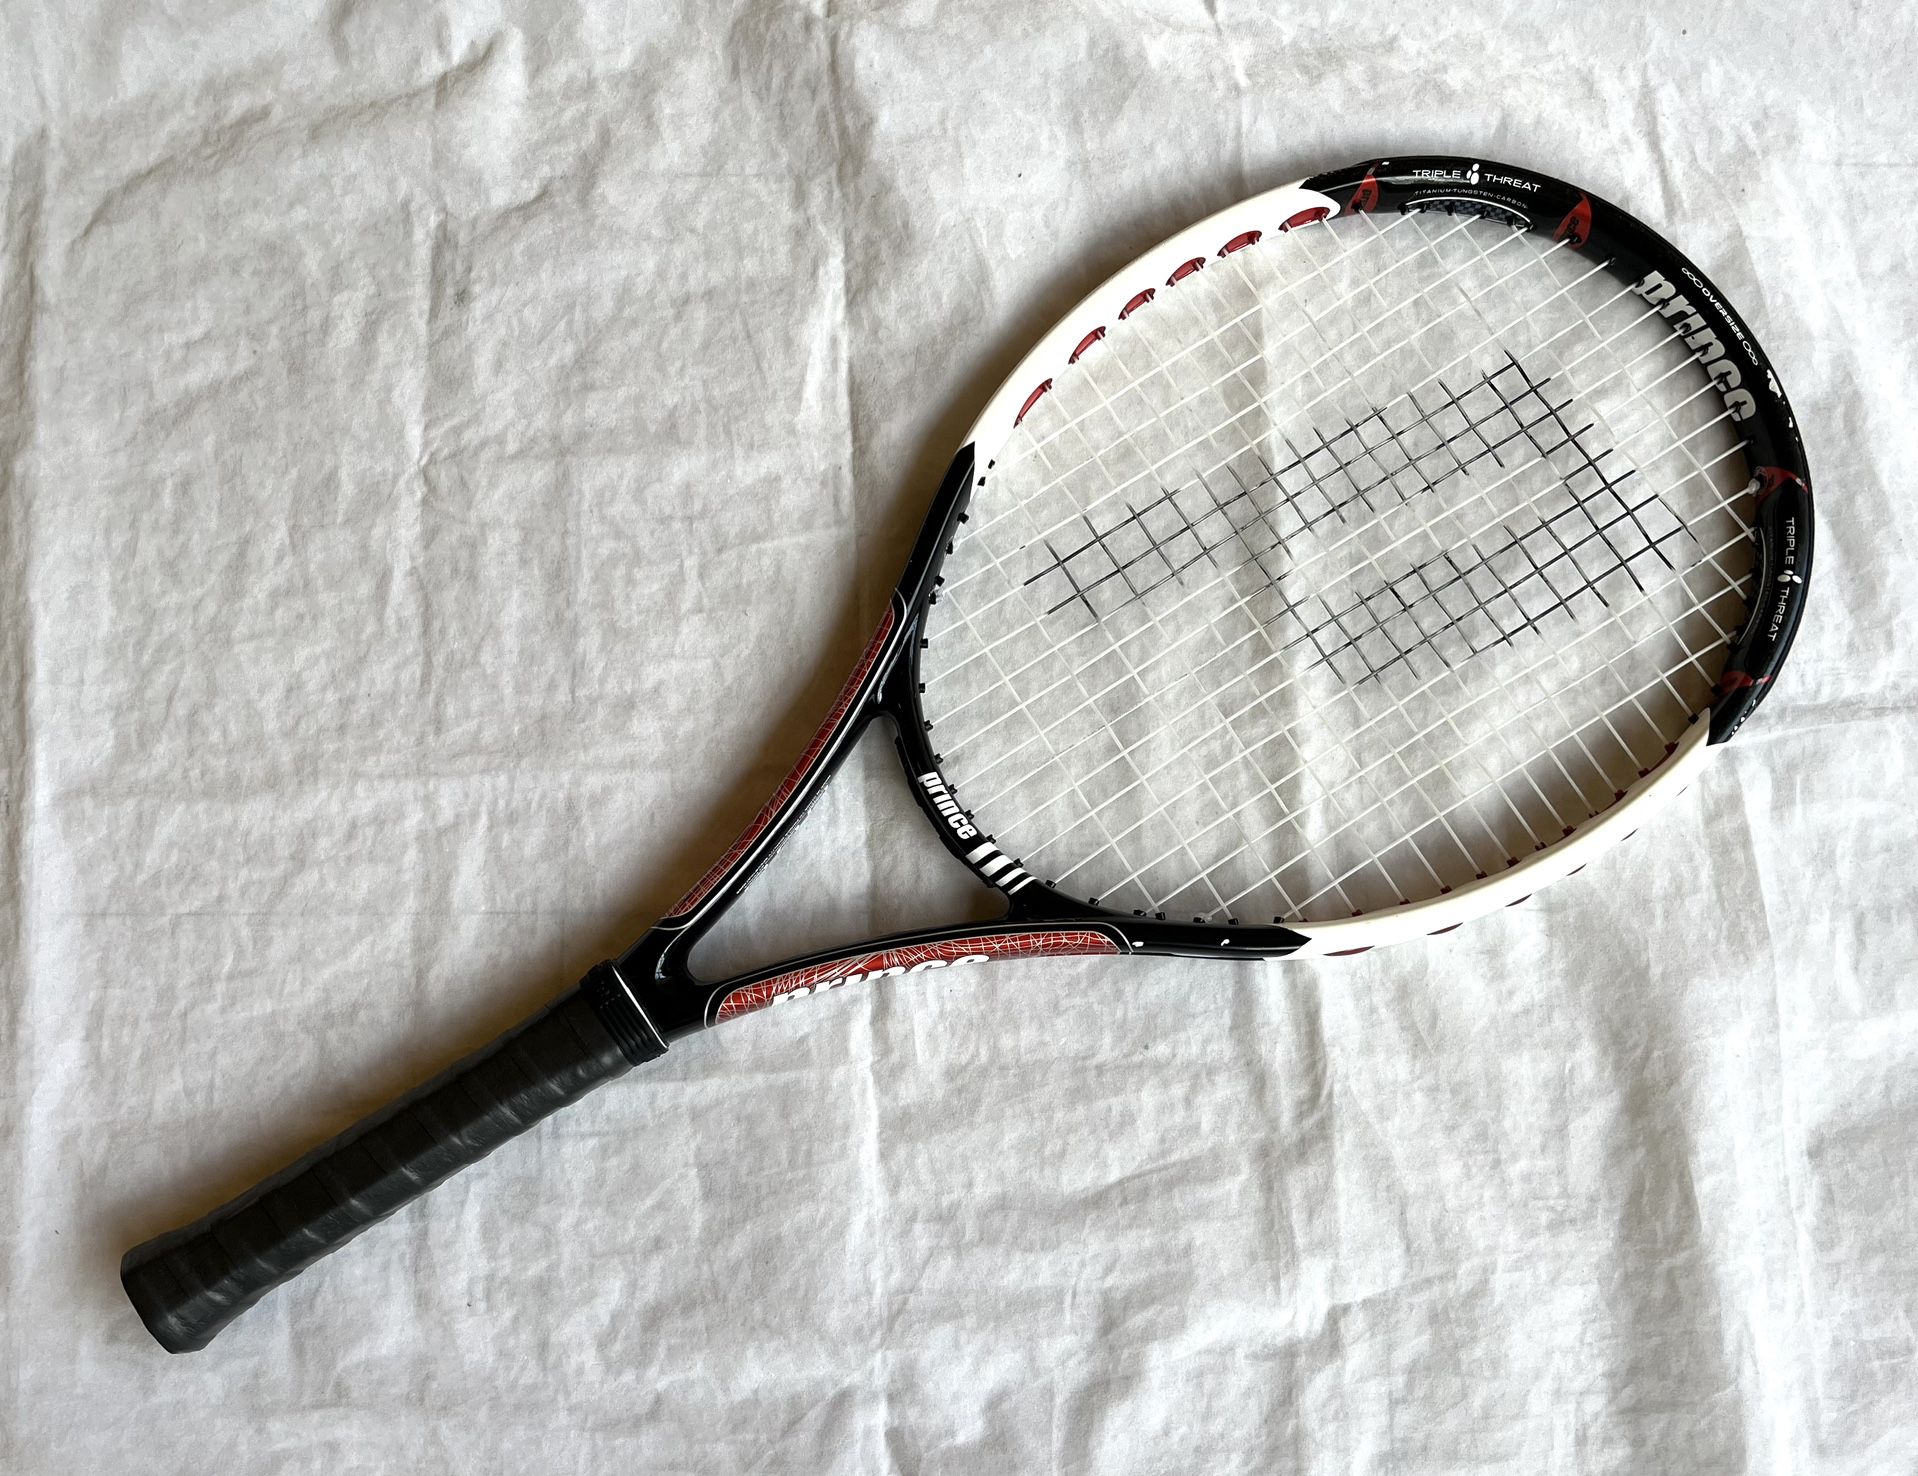 Prince Air Volley Oversize Tennis Racquet / Racket - PRICE FIRM